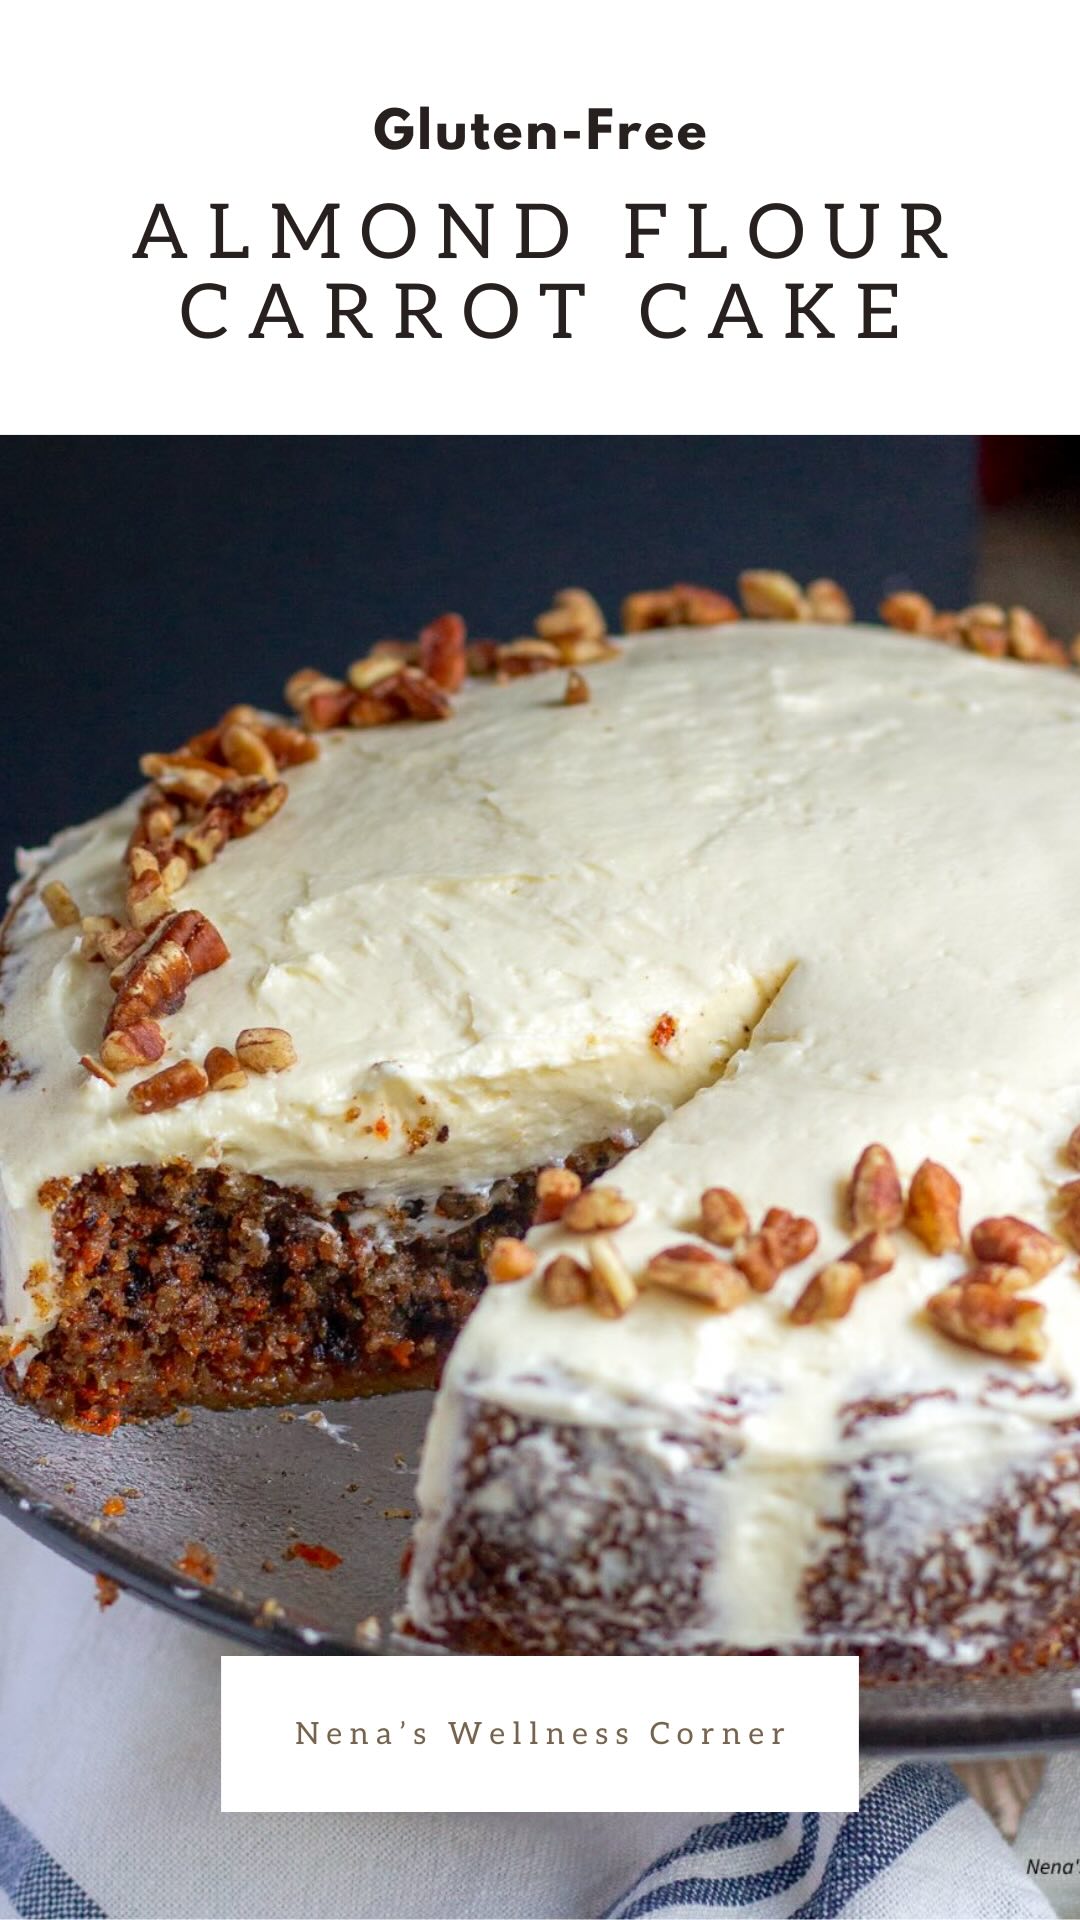 Gluten-free Carrot Cake with Almond Flour on a serving plate Pinterest Pin